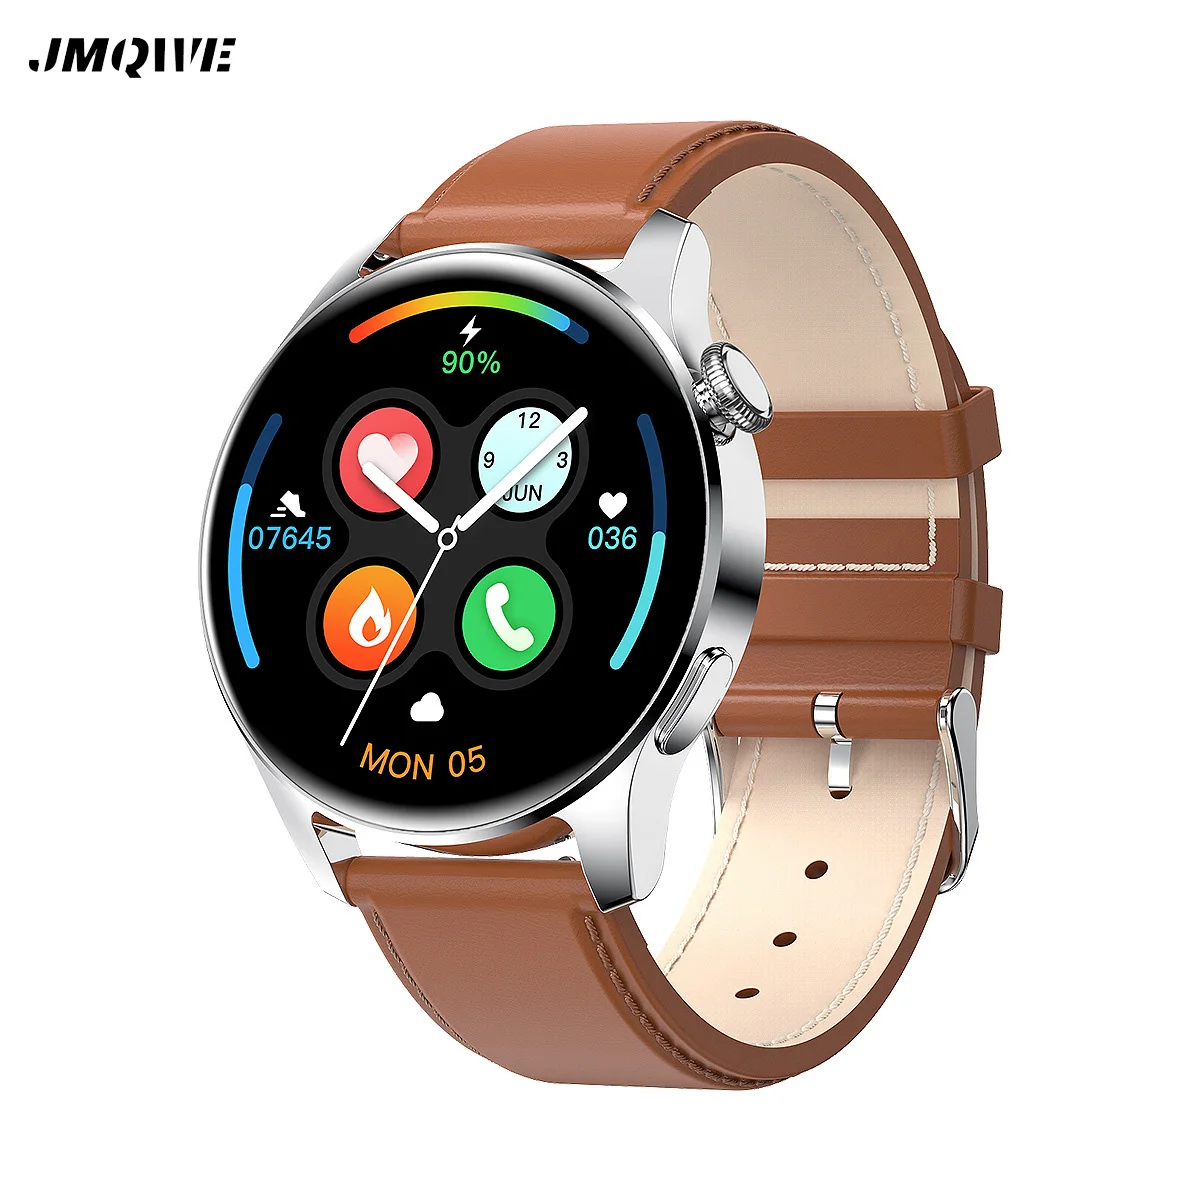 2022 New For HUAWEI Smart Watches Men Waterproof Sport Fitness Tracker Weather Display Bluetooth Call Smartwatch For Android IOS